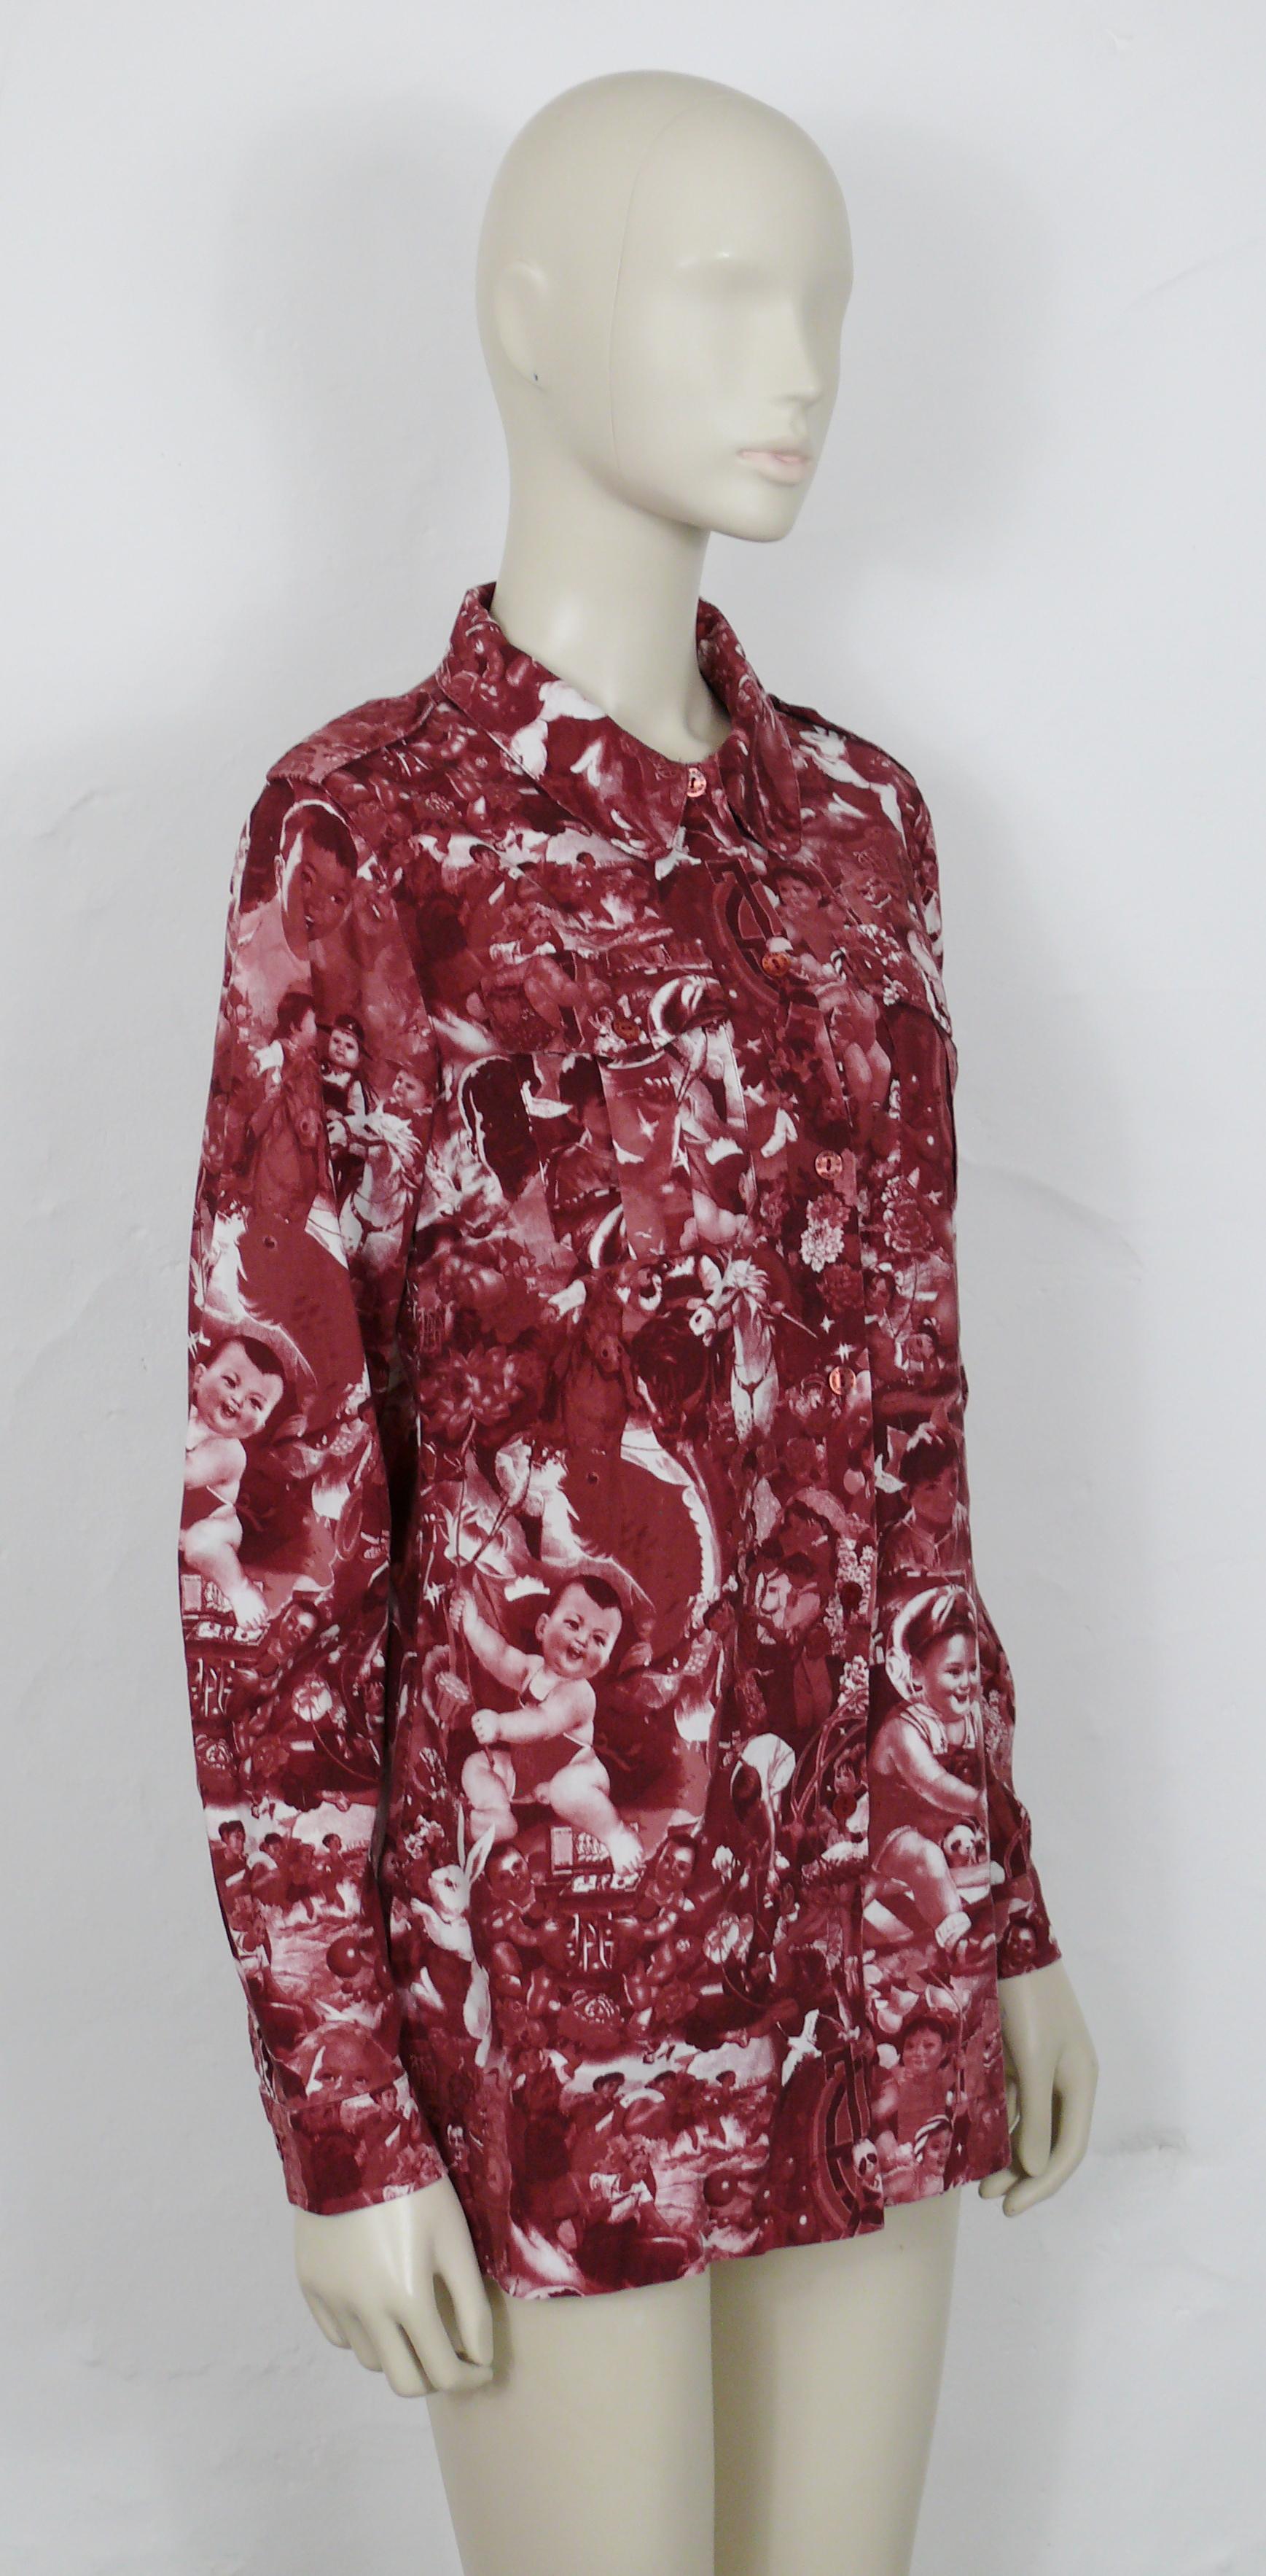 JEAN PAUL GAULTIER vintage claret red Chinese propaganda print cotton shirt featuring babies and children.

This shirt features :
- Peter pan collar.
- Long sleeves.
- Front and cuff buttoning.
- Breast pockets.
- Epaulets with velcro